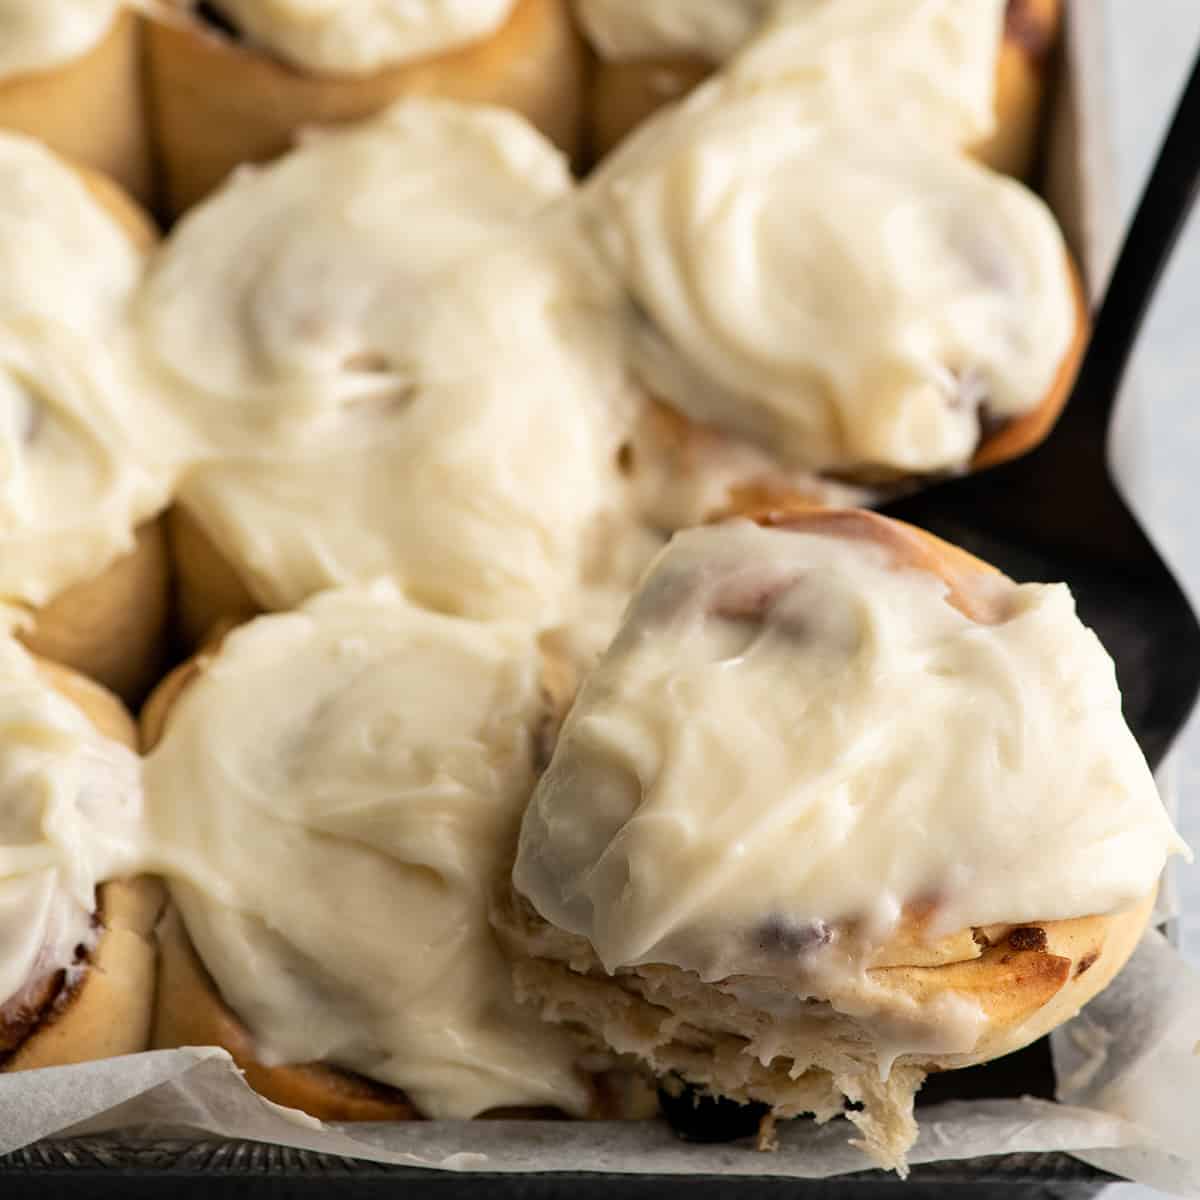 a cinnamon roll being lifted out of a baking pan with a pie server